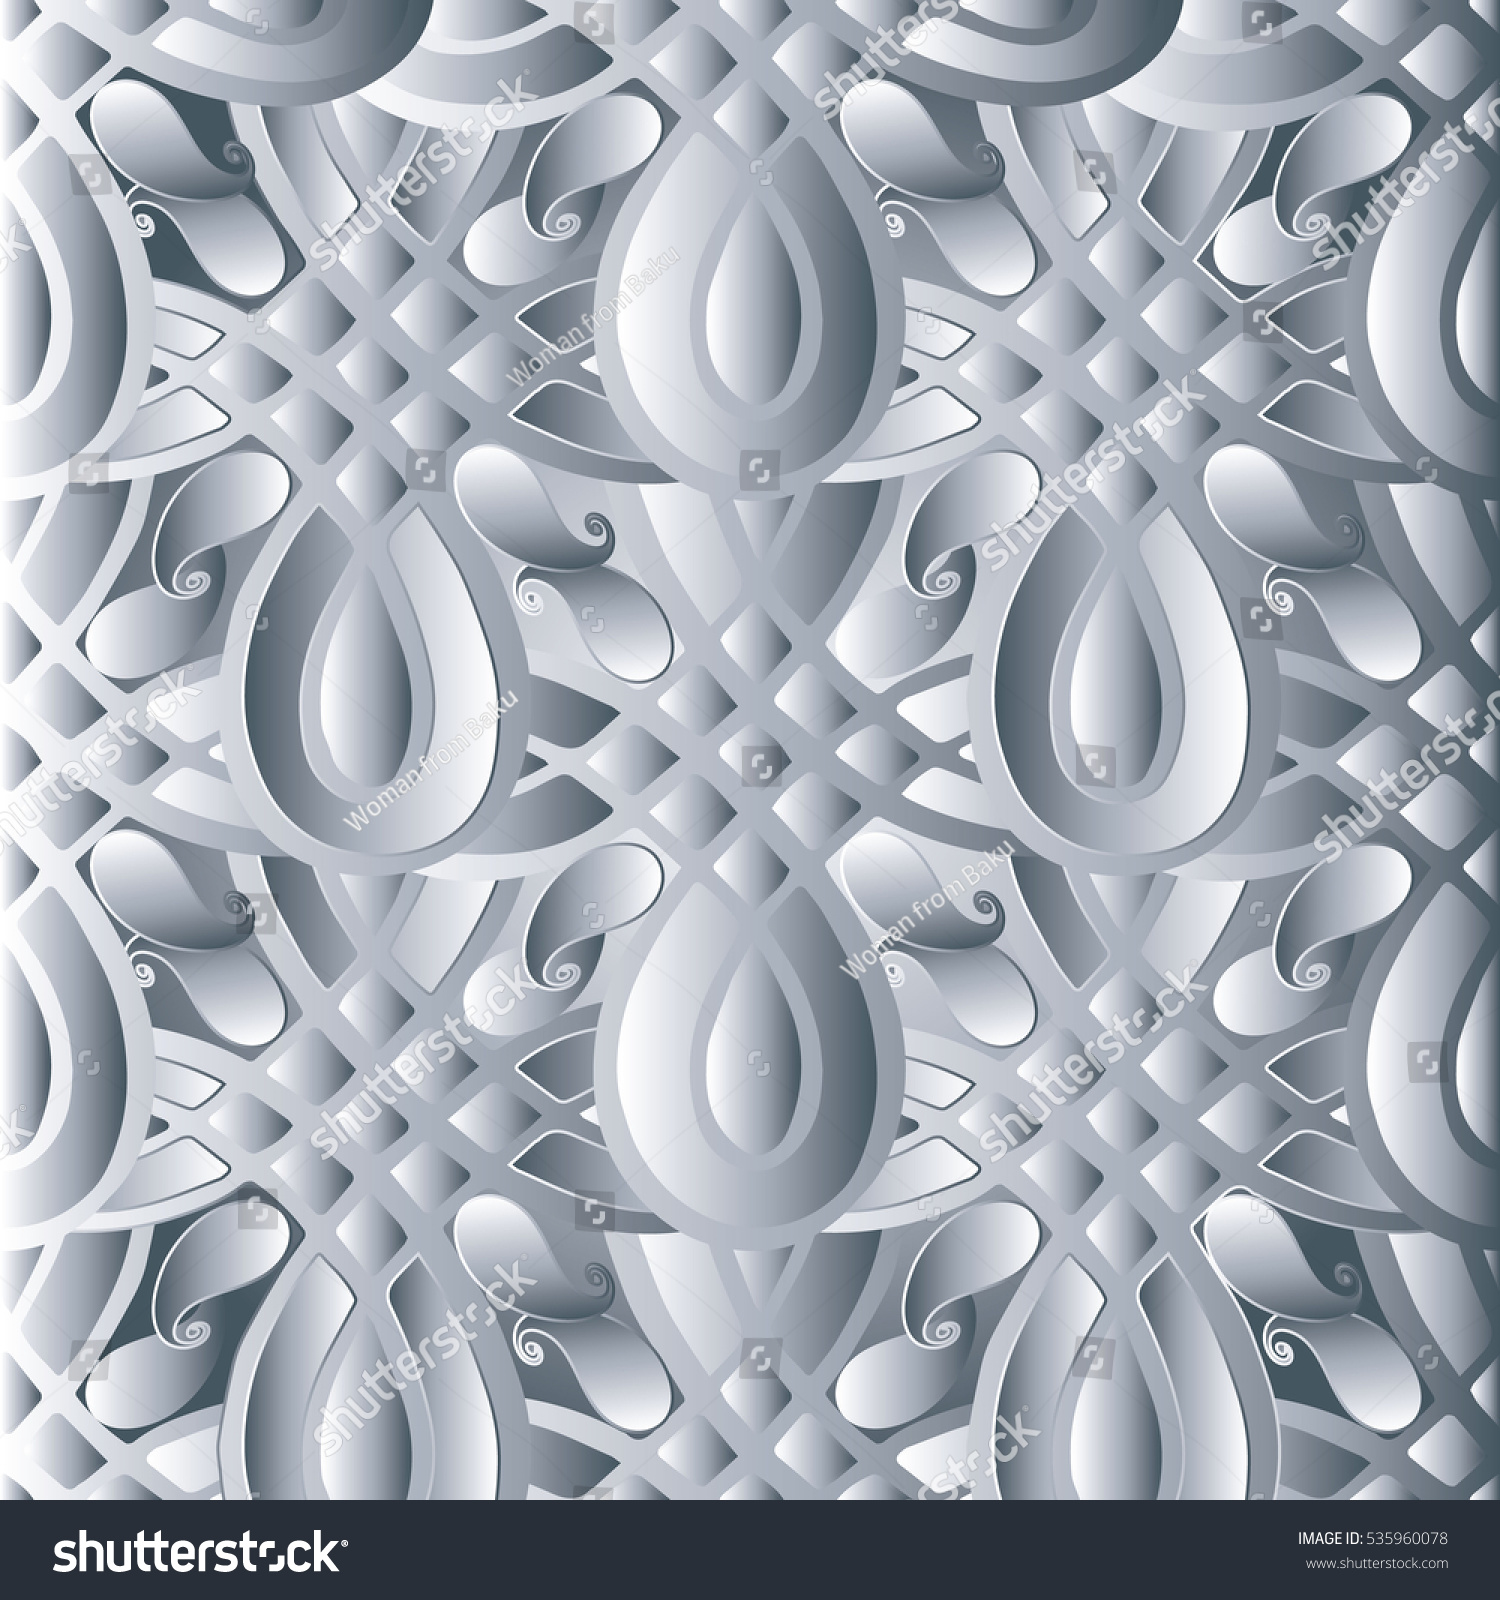 Abstract Vintage 3d Paisleys Seamless Pattern Stock Vector